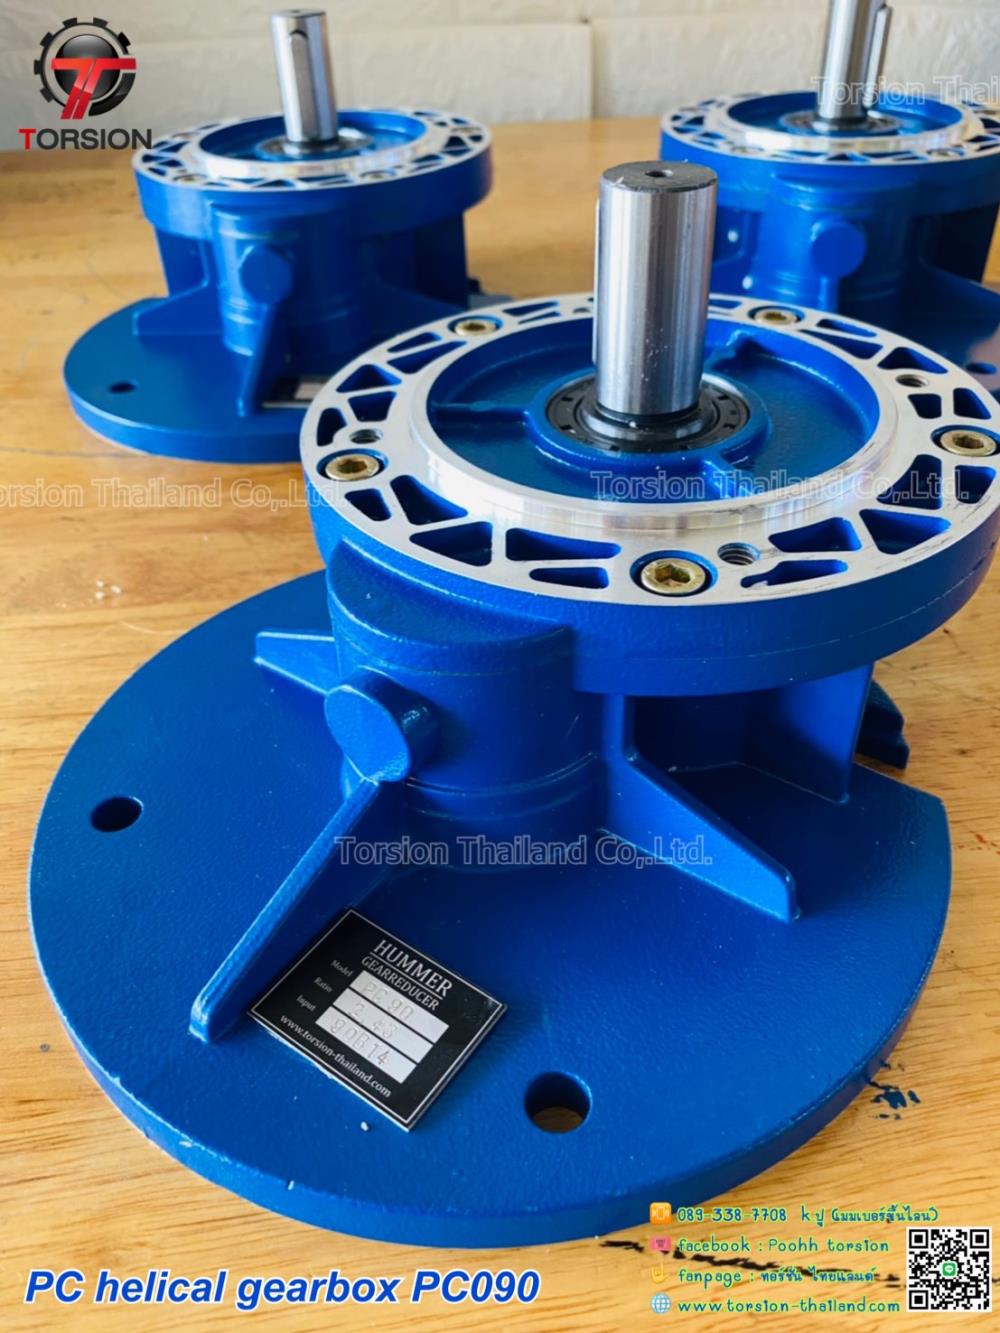 PC helical gearbox PC090,PC helical gearbox PC090 , PC helical gearbox , PC helical , Pre-stage helical unit , hummer , Pre-stage , Pre-stage helical,HUMMER,Machinery and Process Equipment/Gears/Gearboxes